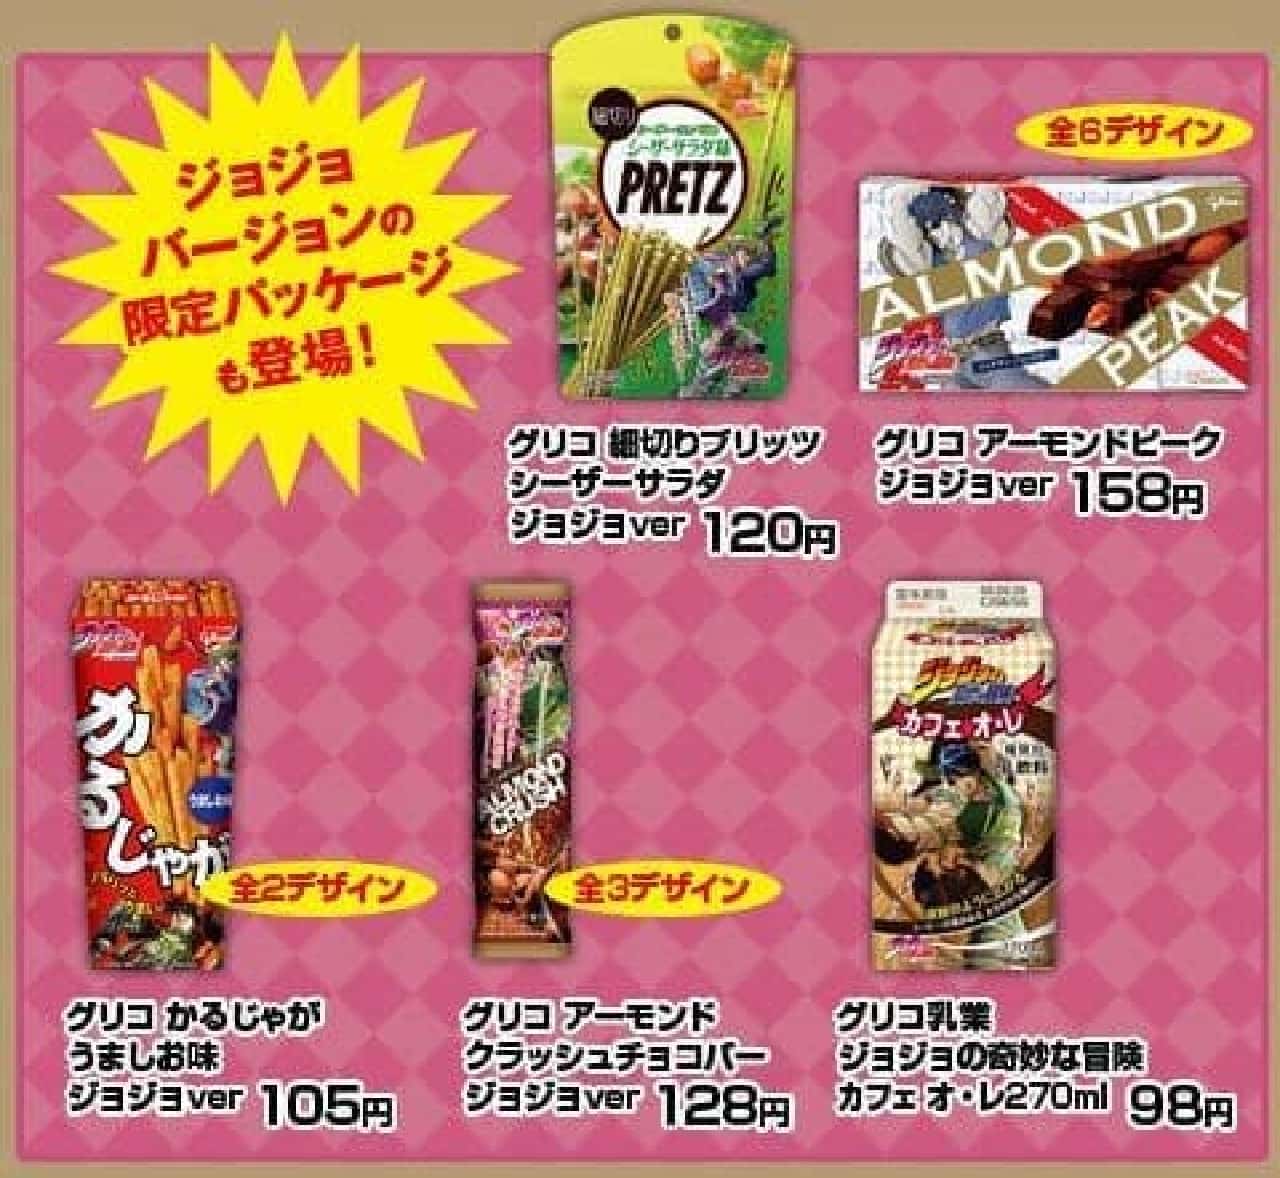 Jojo's limited package is here!